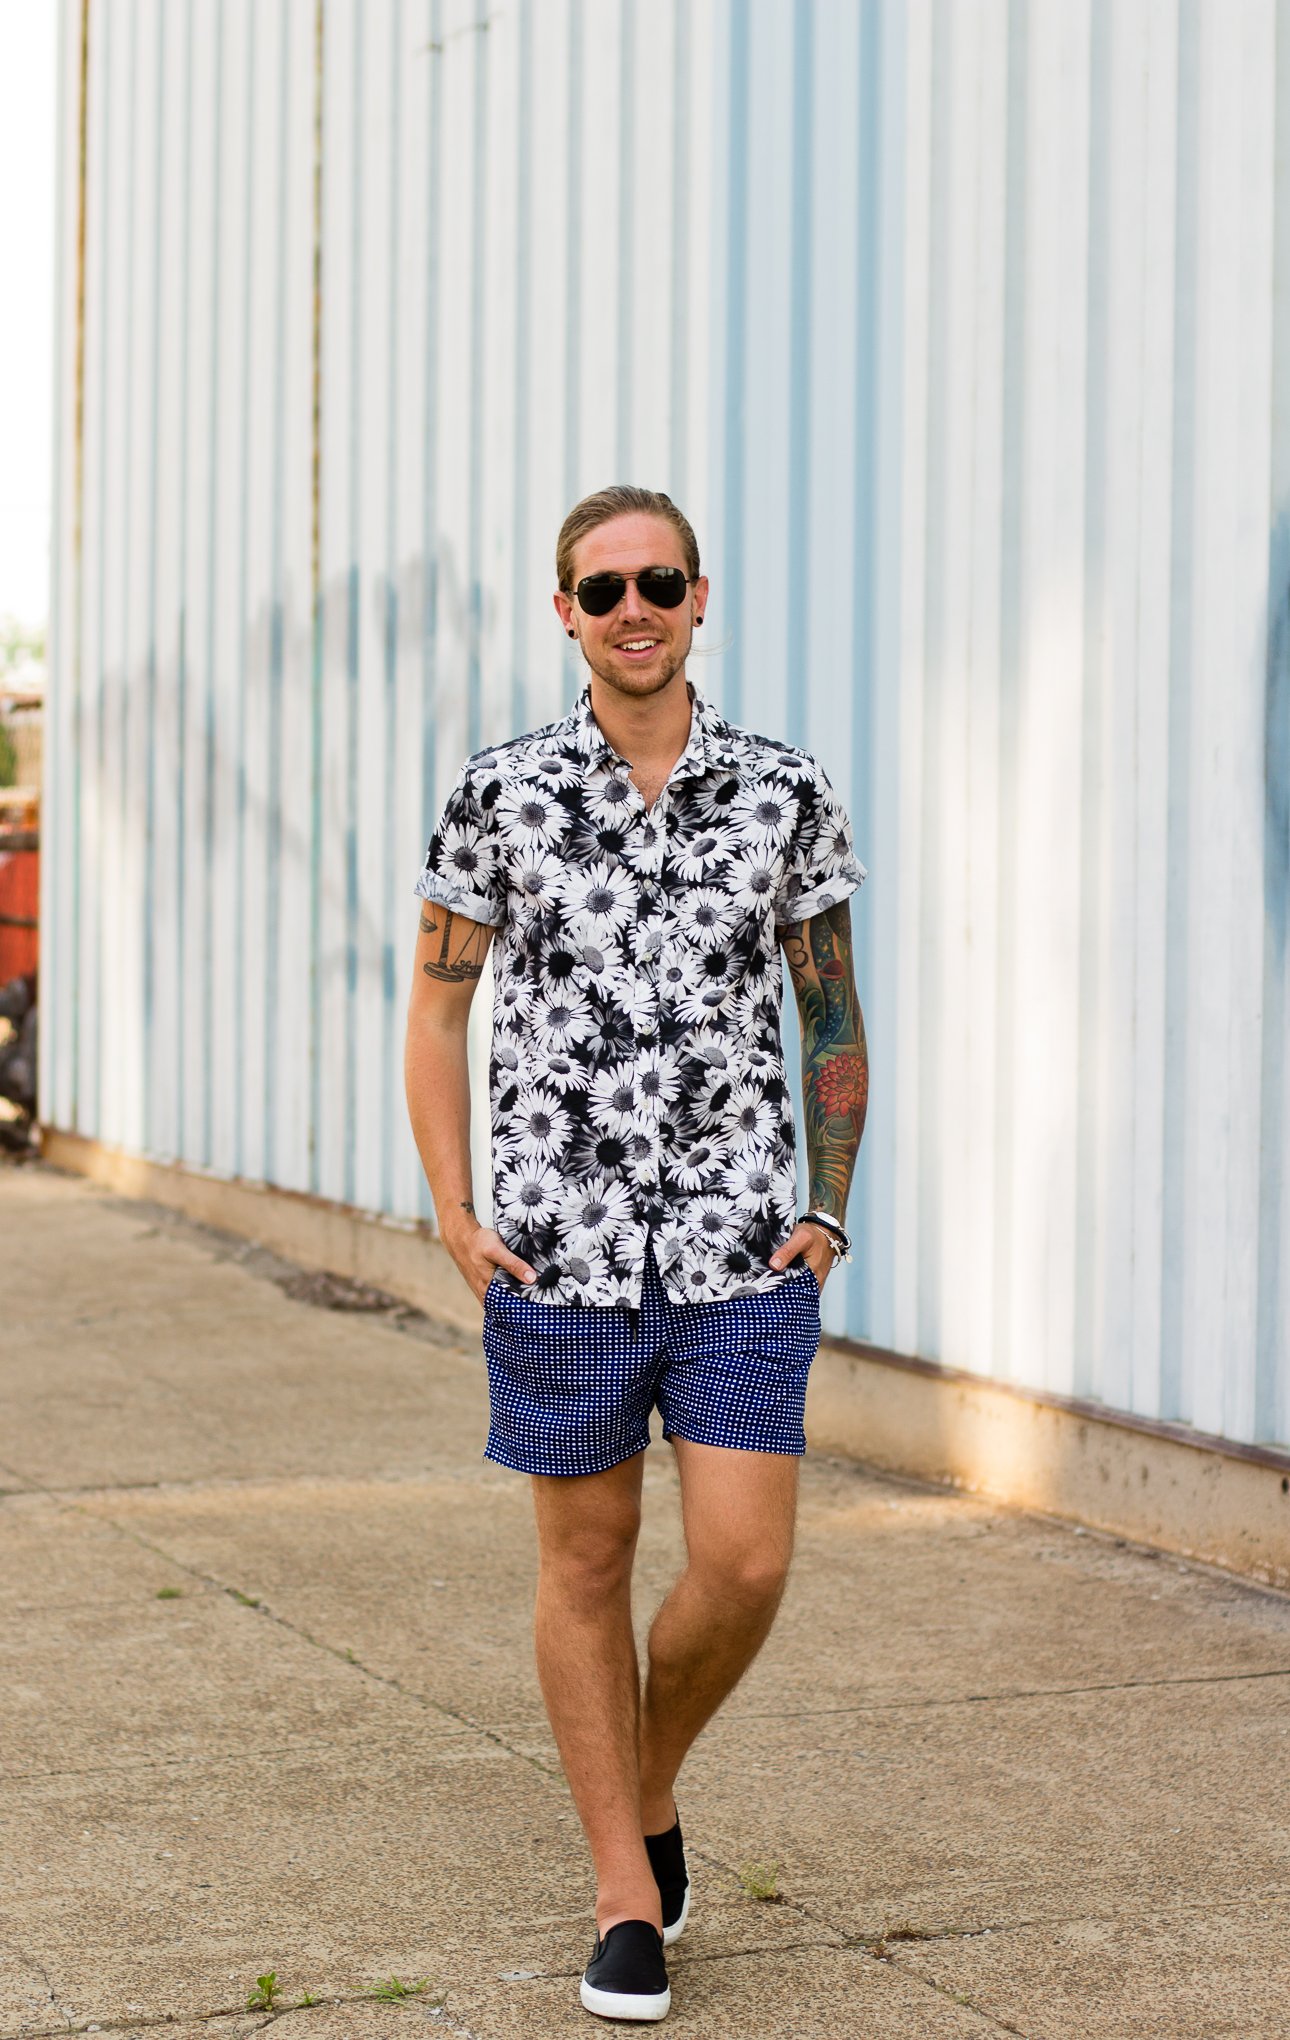 topman, hm, floral shirts, printed shorts, how to wear prints